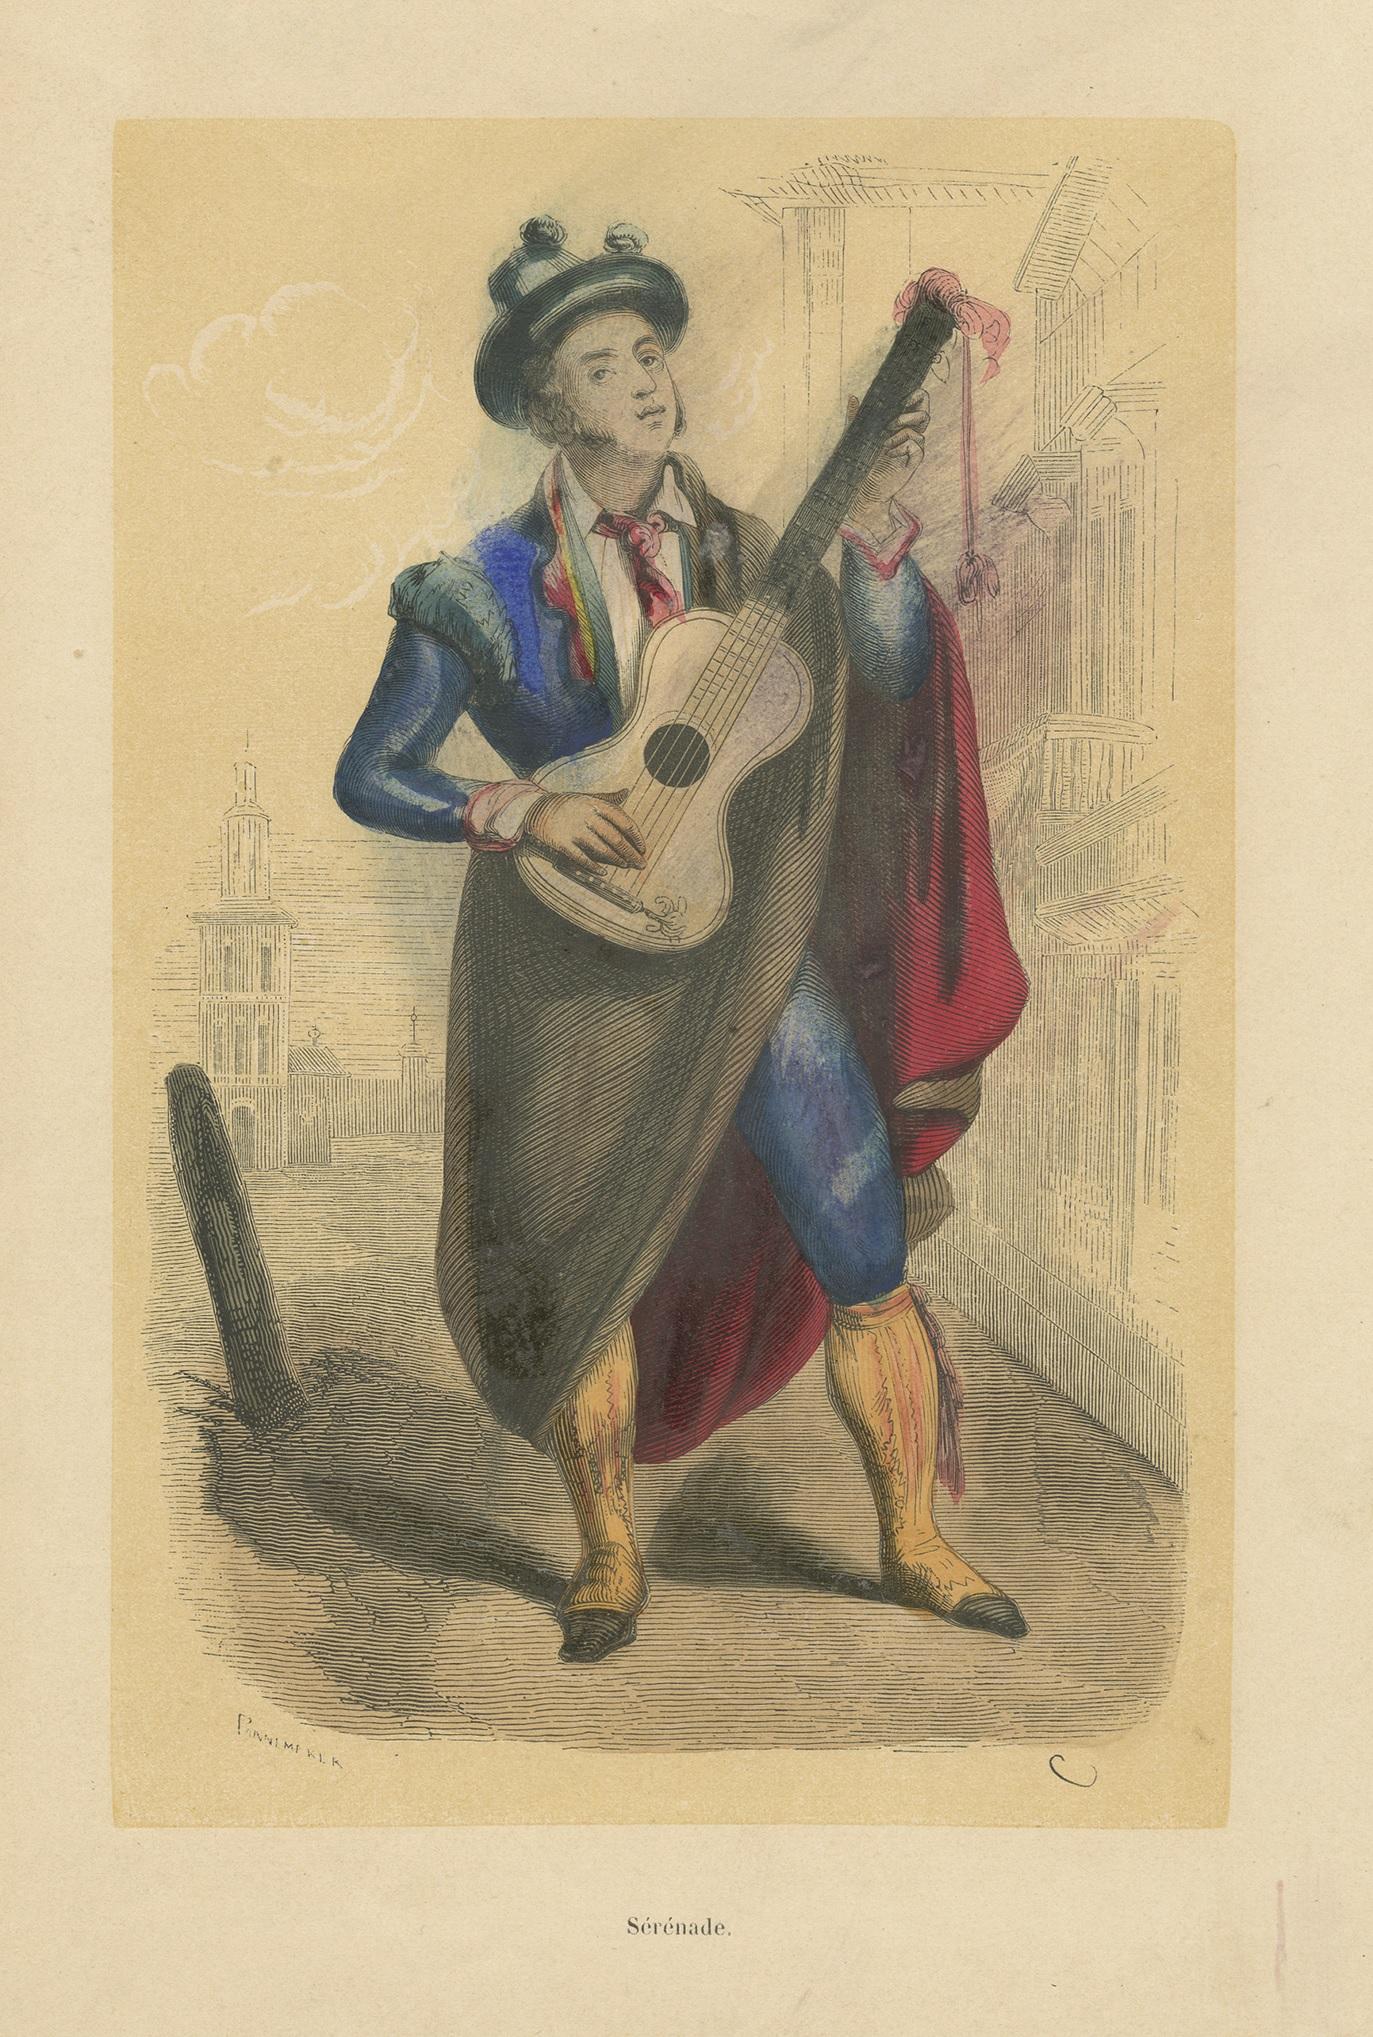 Antique print titled 'Sérénade'. Old print of a male figure playing the guitar. This print most likely originates from an edition of 'Costumes and habits of people from all parts of the world' by Auguste Wahler. Signed 'Pannemaker'.